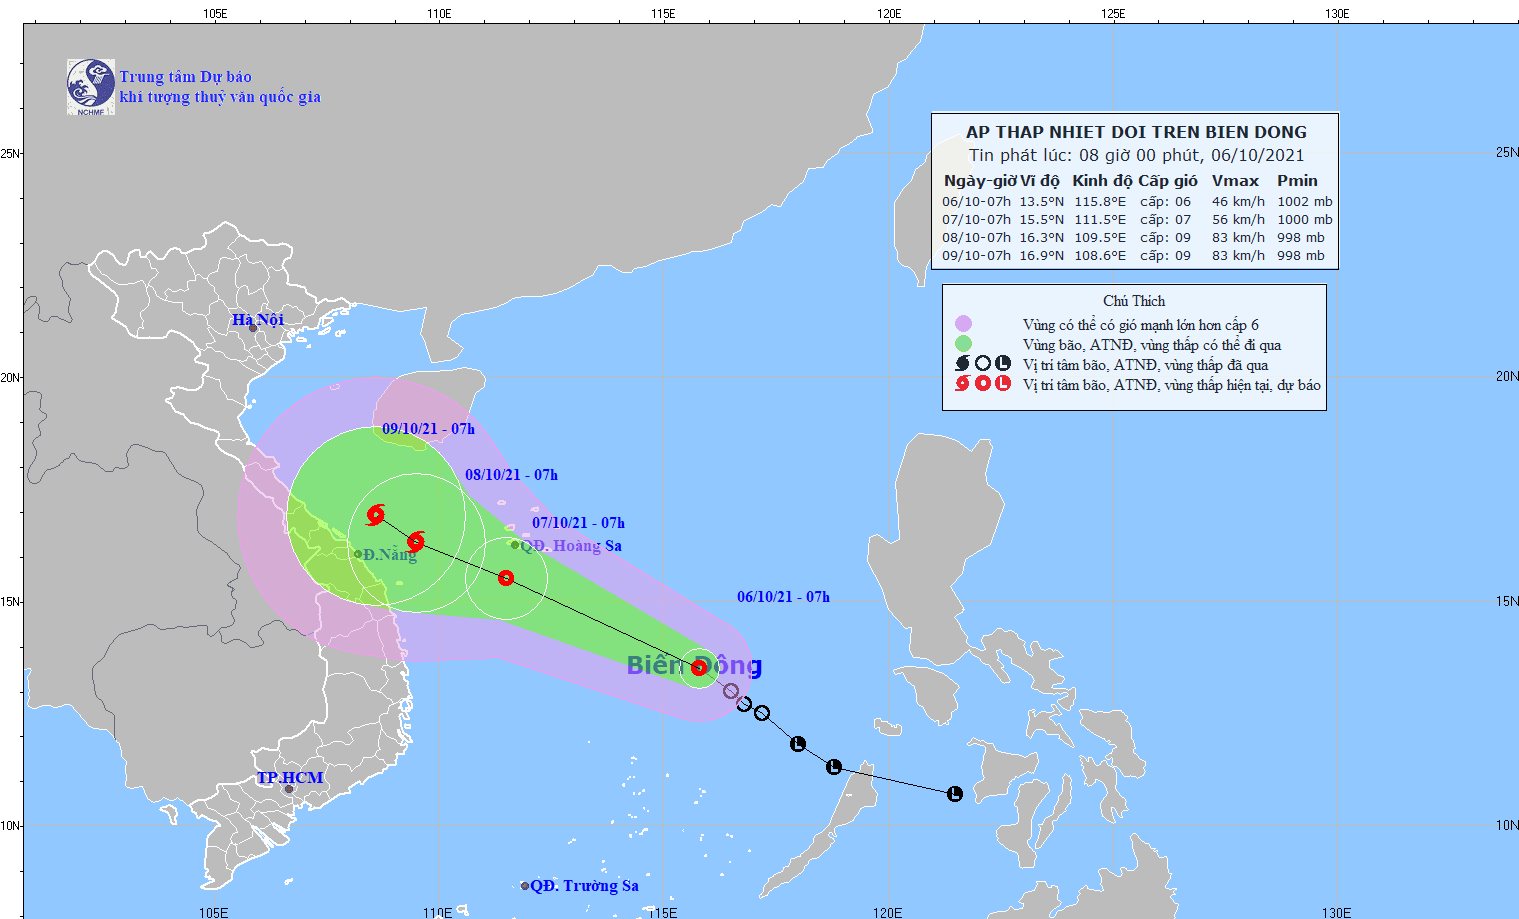 A tropical depression entering the East Sea is likely to strengthen into a storm.